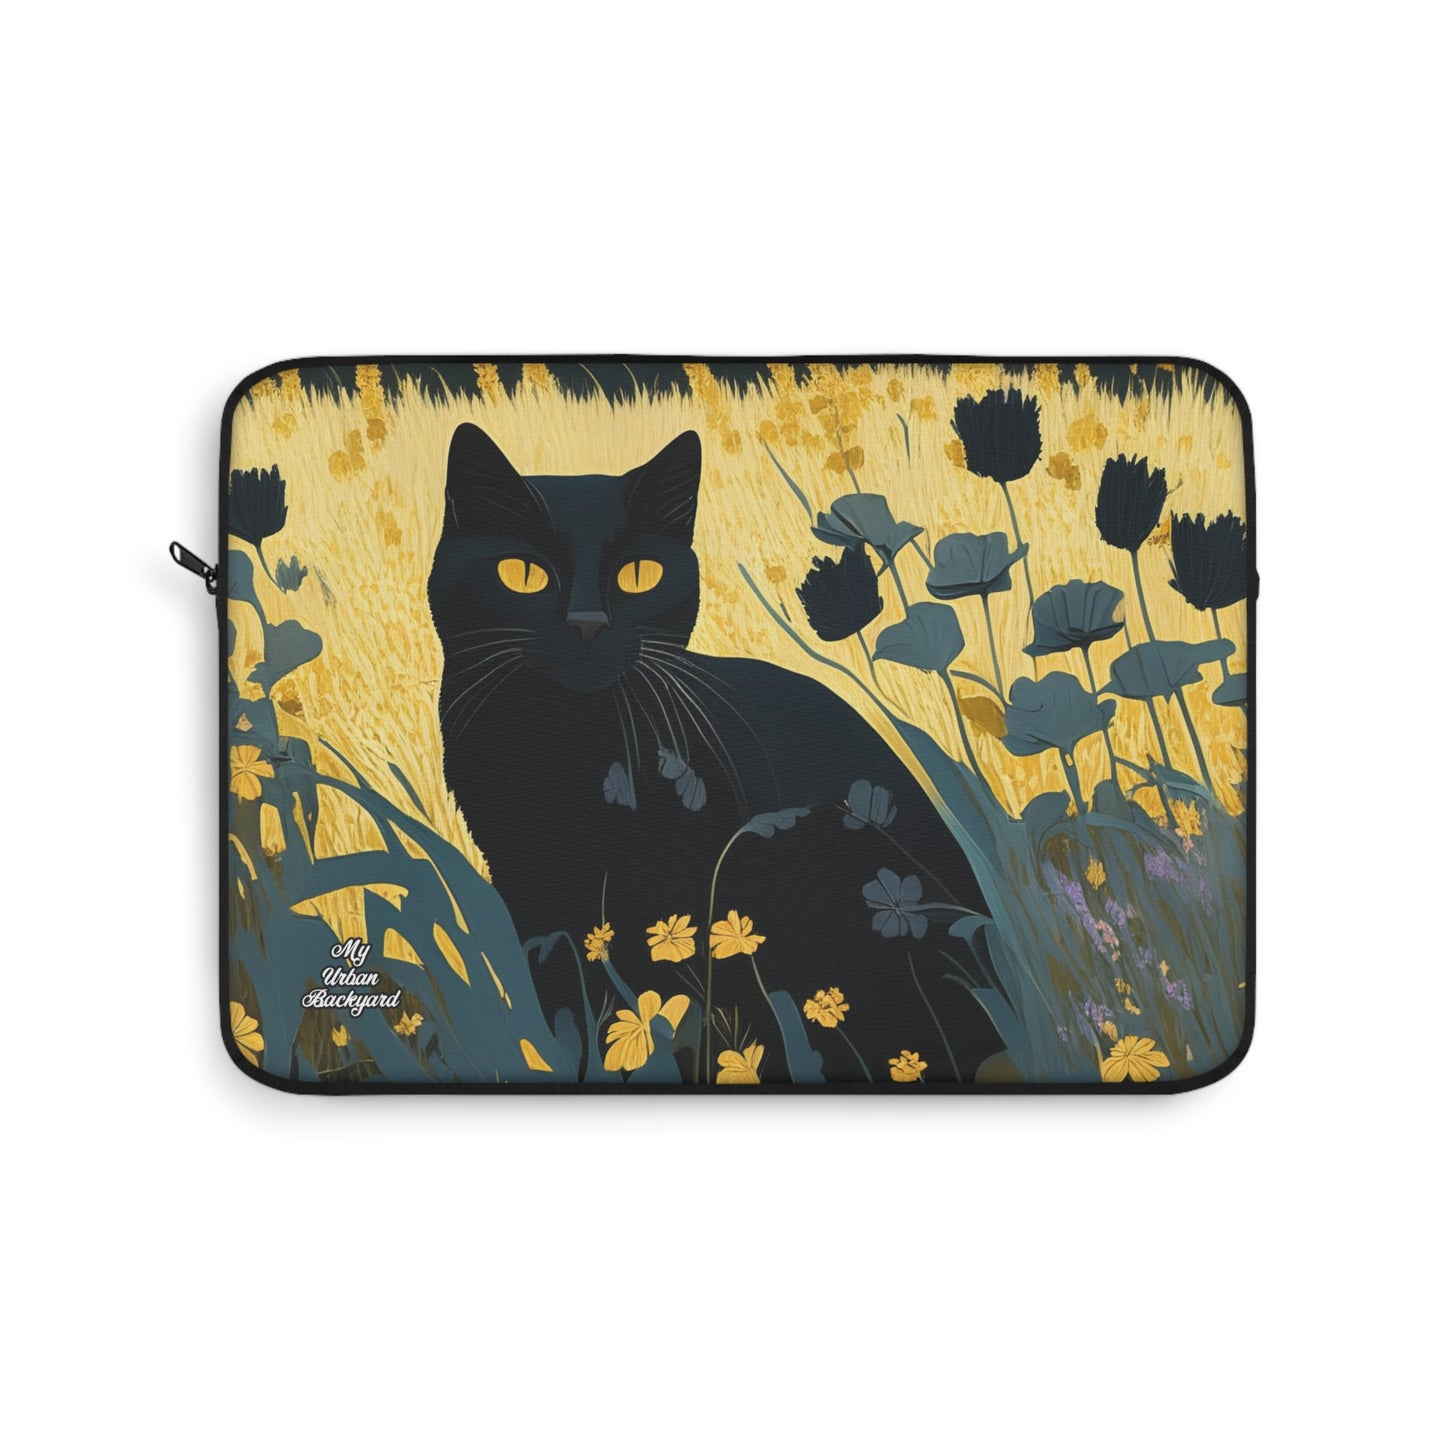 Black Cat with Black Flowers, Laptop Carrying Case, Top Loading Sleeve for School or Work